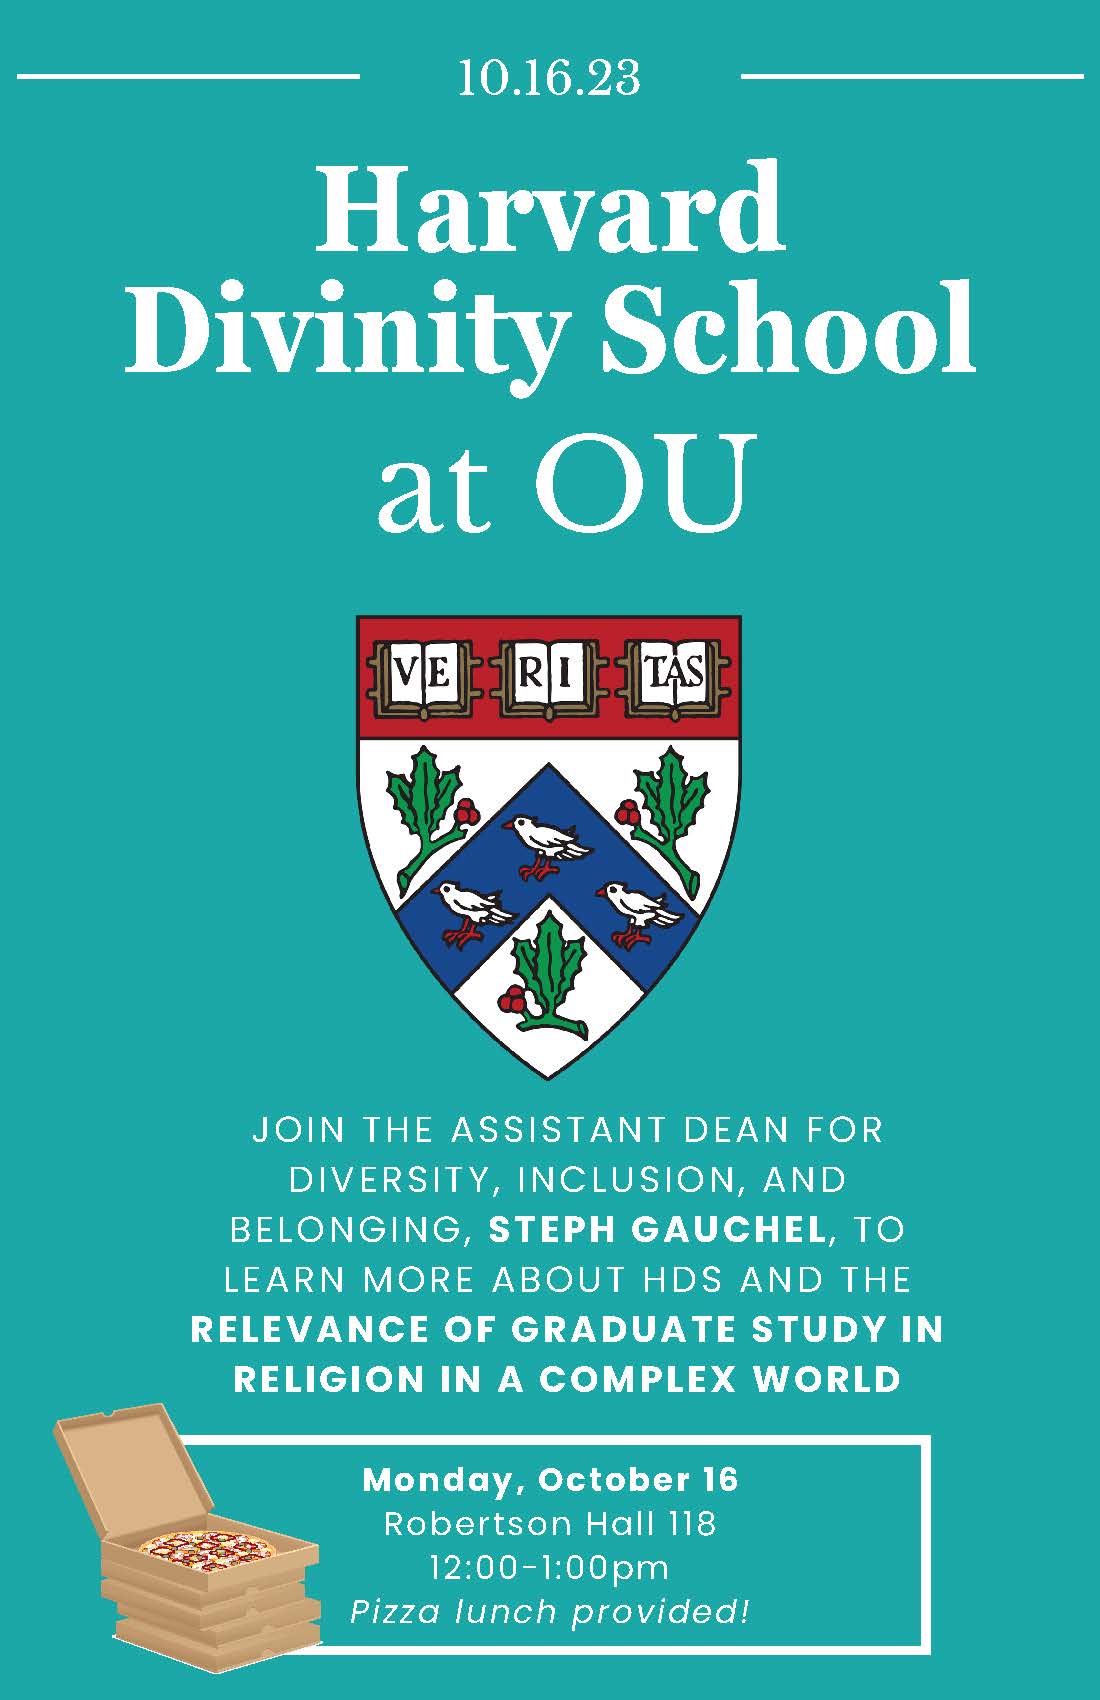 Harvard Divinity School at OU     Join Harvard Divinity School’s Assistant Dean for Diversity, Inclusion, and Belonging, Steph Gauchel, to learn more about HDS and the relevance of graduate study in religion in a complex world.     12:00 – 1:00 p.m.  Monday, Oct. 16  Robertson Hall 118     Pizza lunch will be provided!